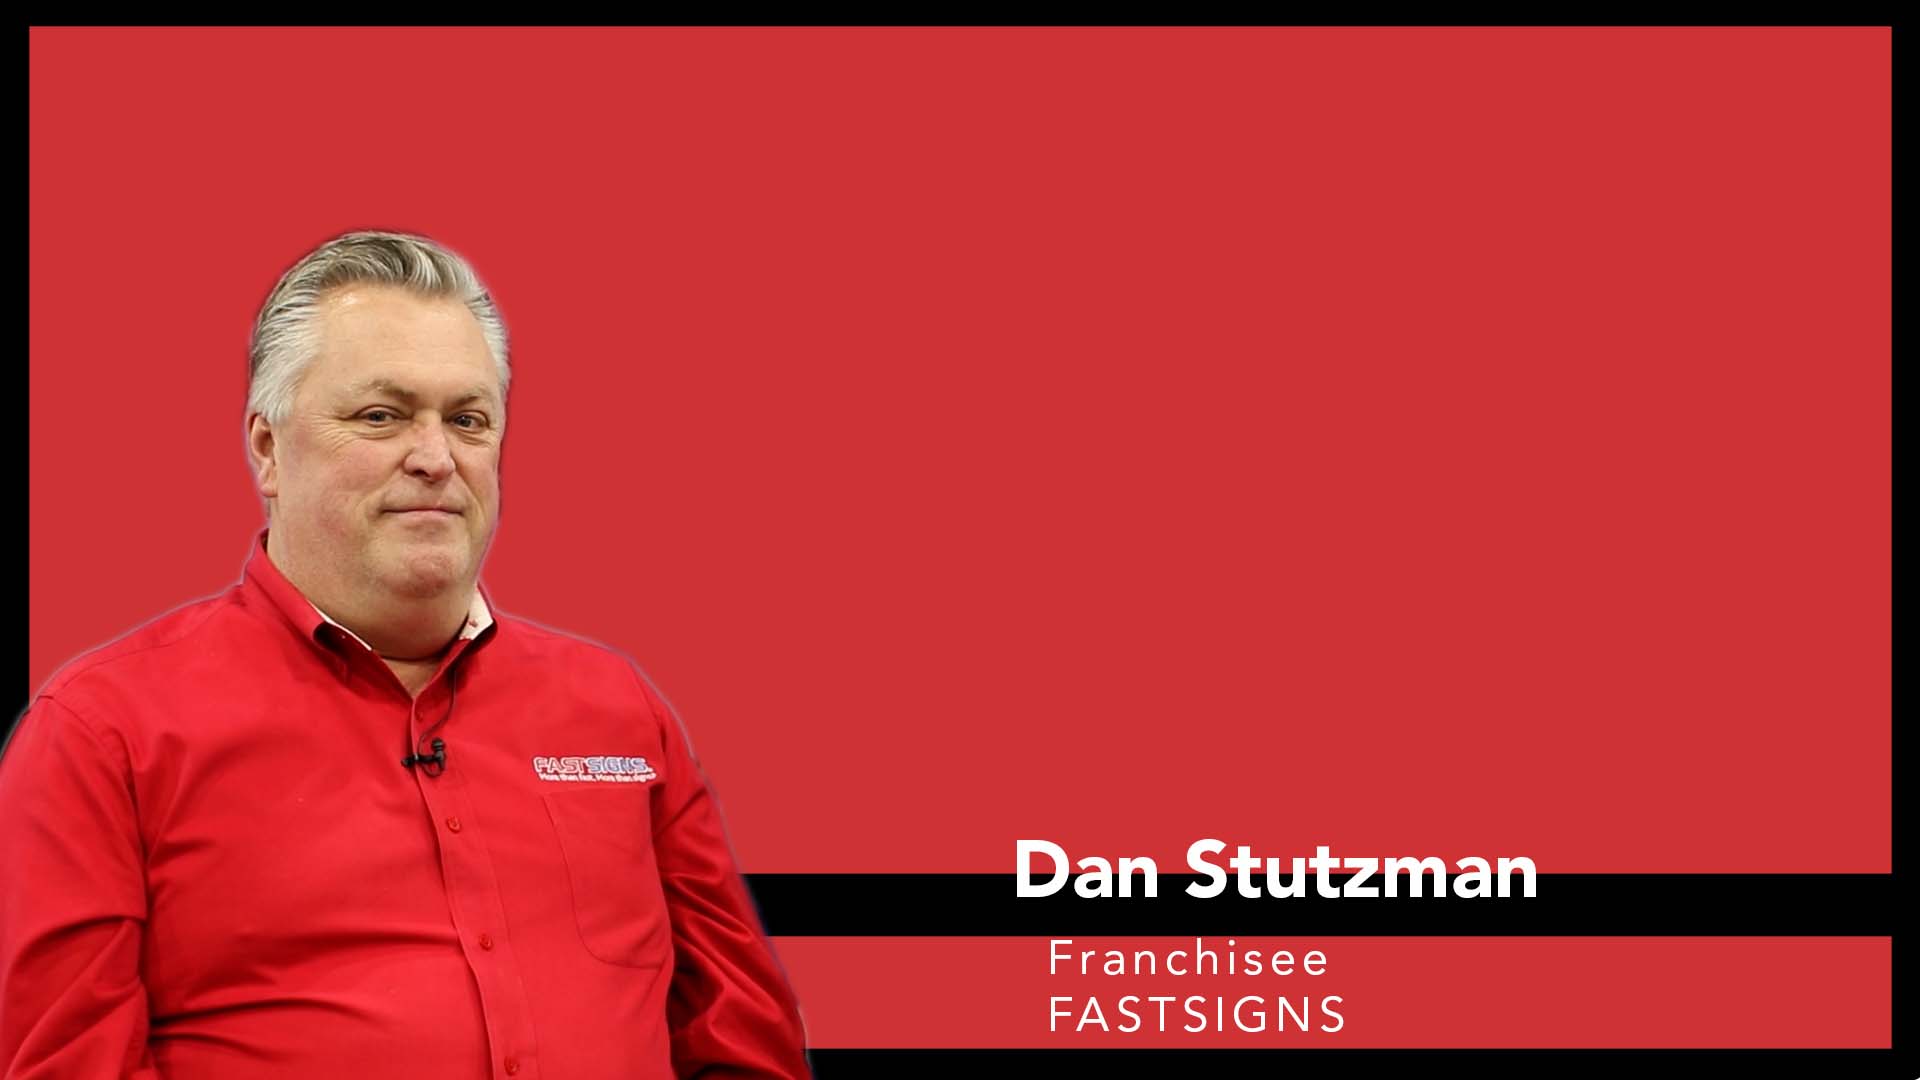 Making the Leap to Becoming a FASTSIGNS Franchisee